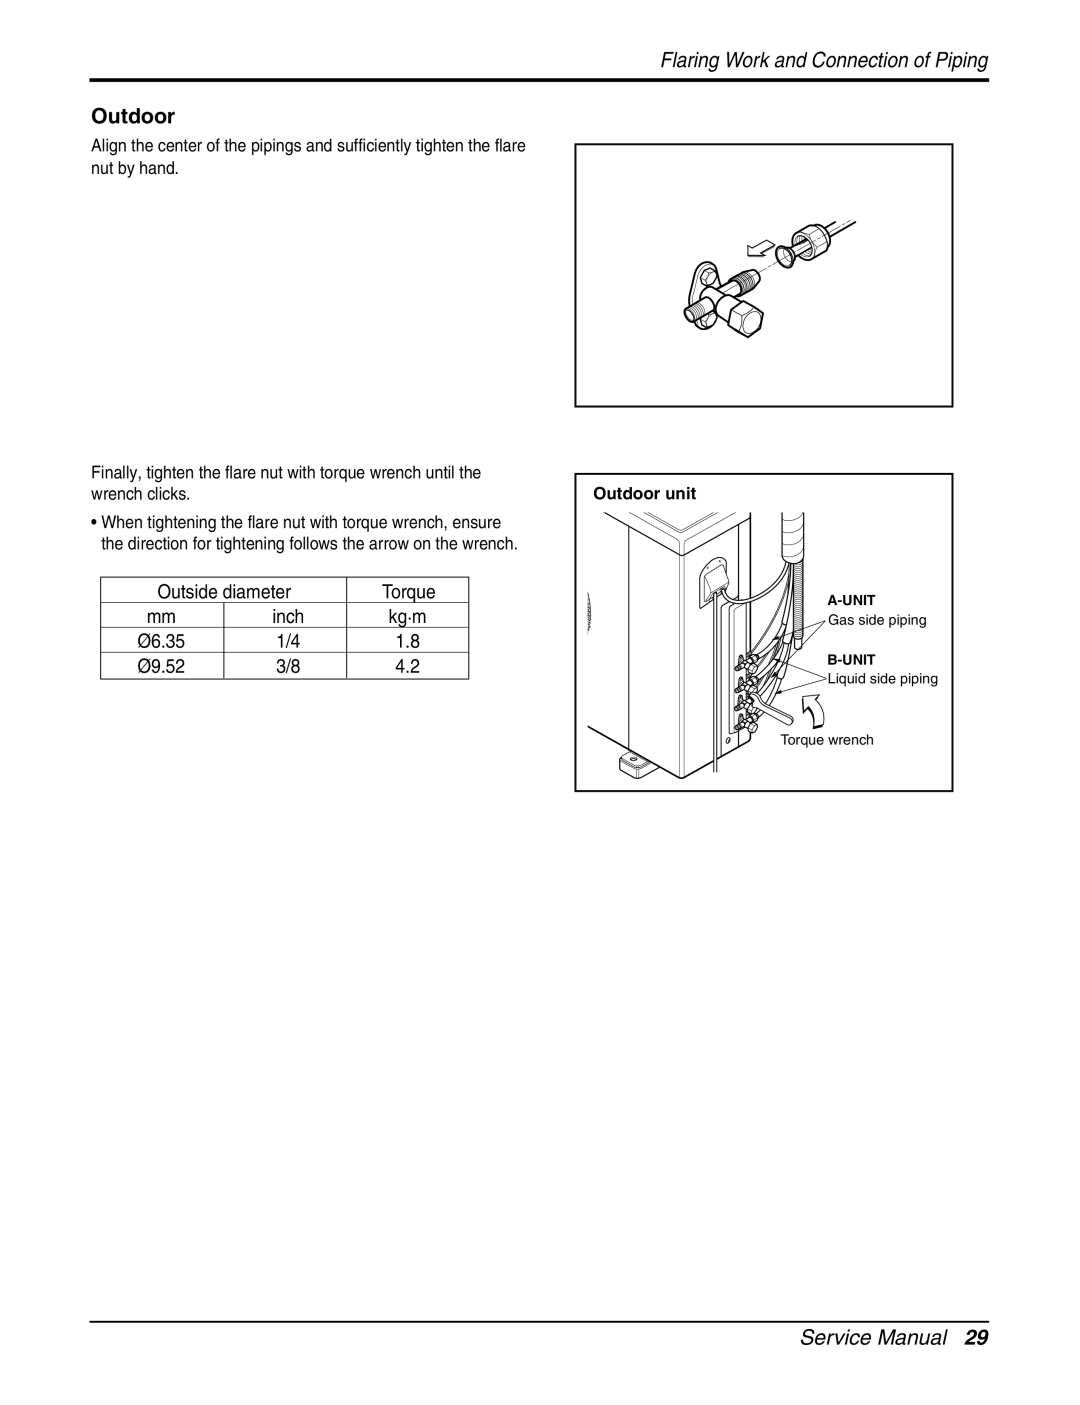 LG Electronics A2UC243FA0 (LMU240CE) Outdoor, Flaring Work and Connection of Piping, Service Manual, Outside diameter 